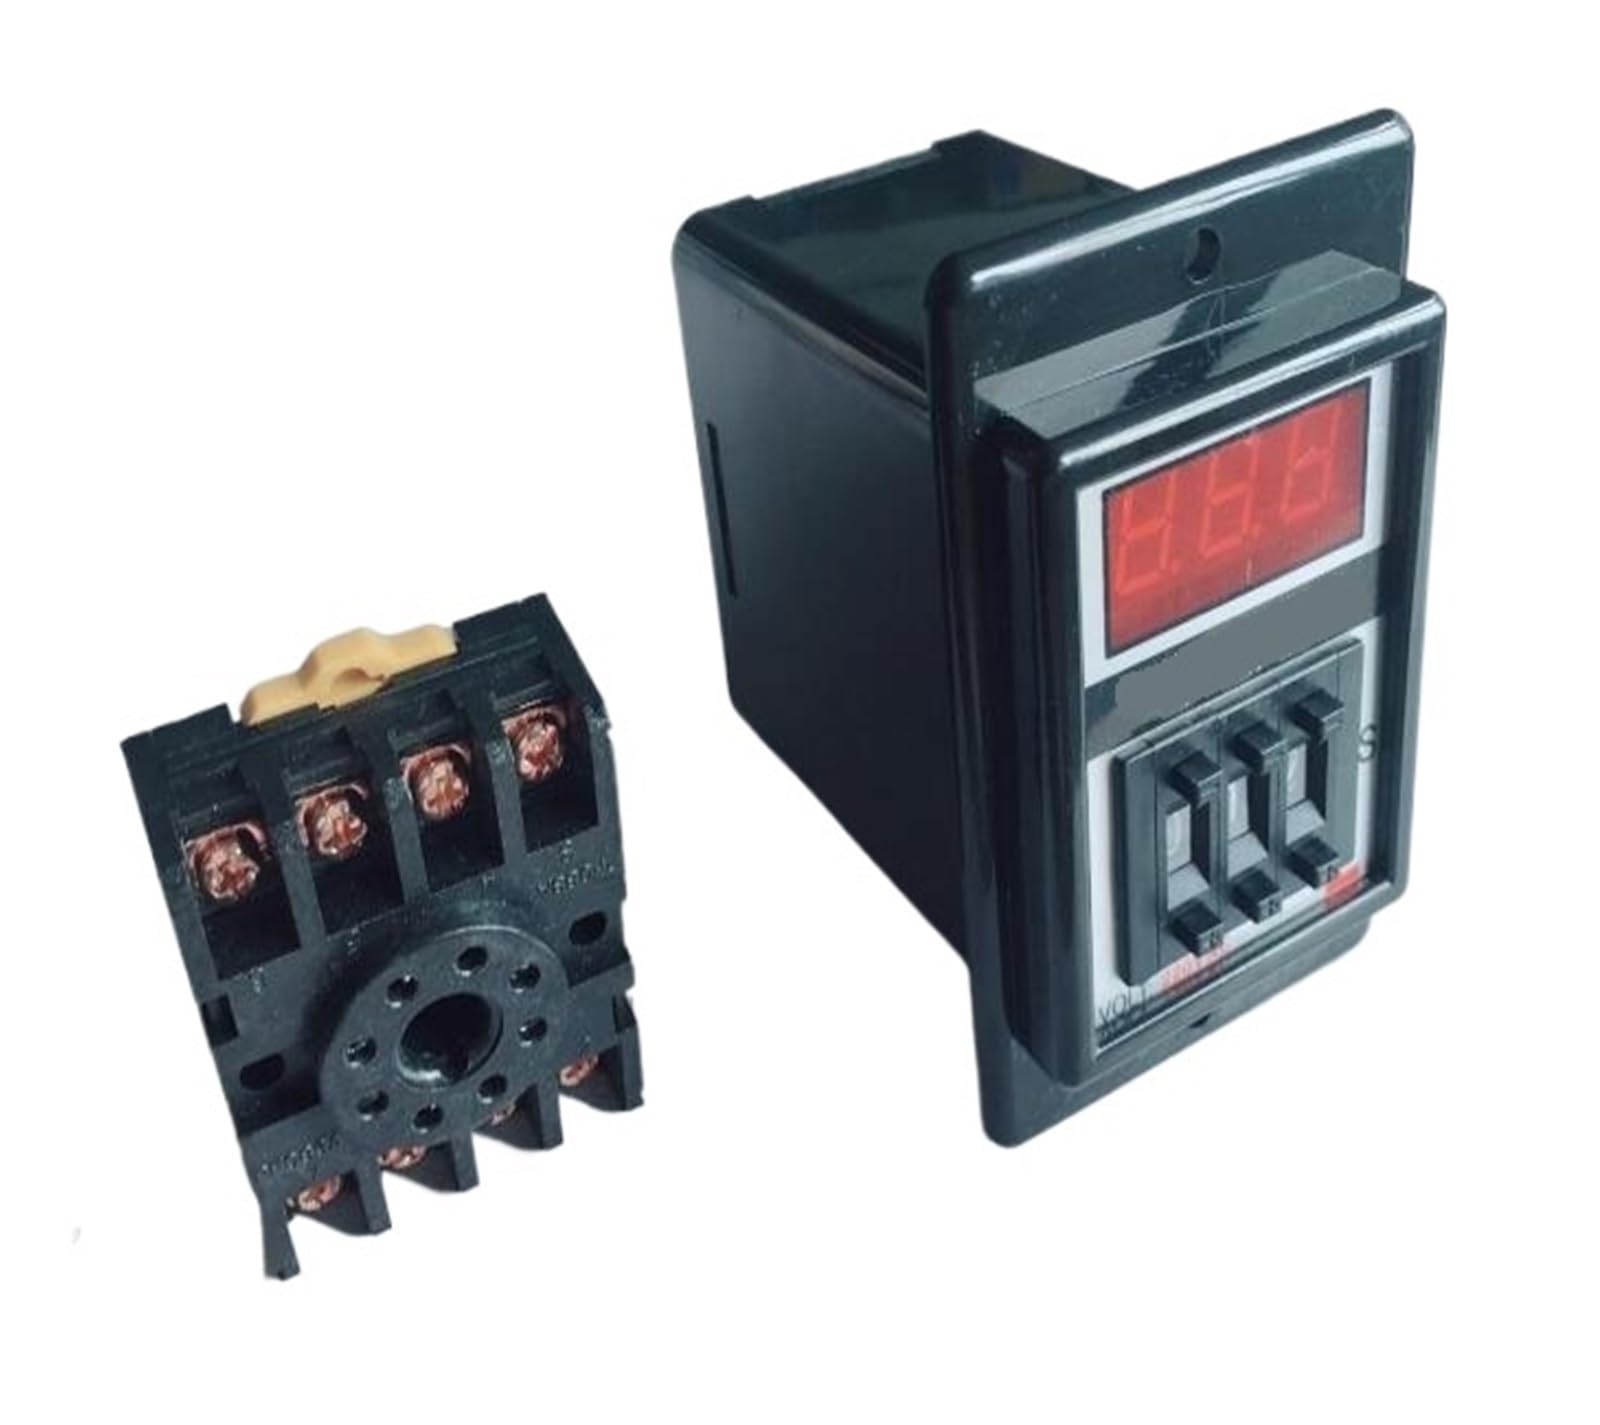 1-999S 1-99.9S 1-999M digits programmable timer delay relay ASY-3D Delay Timer Time Relay 8PIN with base ZDVHOMCB(ASY-3D 999S,DC12V) von ZDVHOMCB